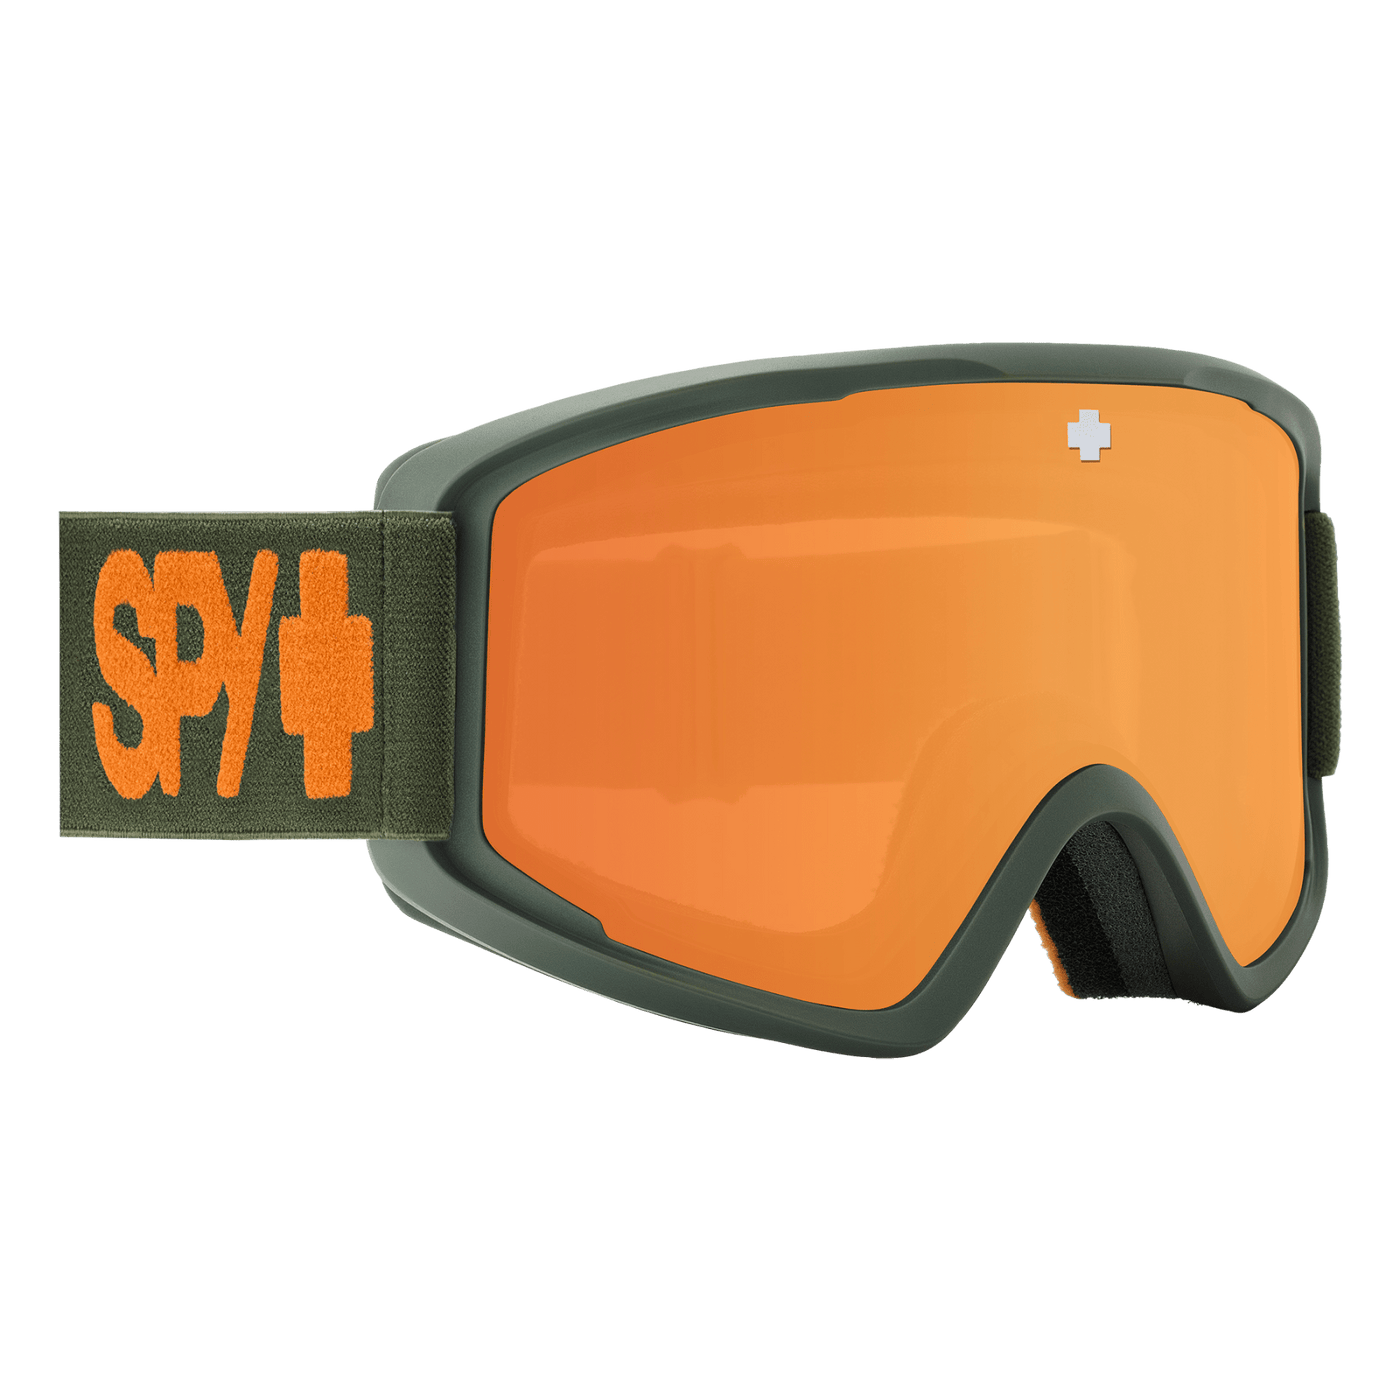 Best youth snow goggle - SPY Matte steel